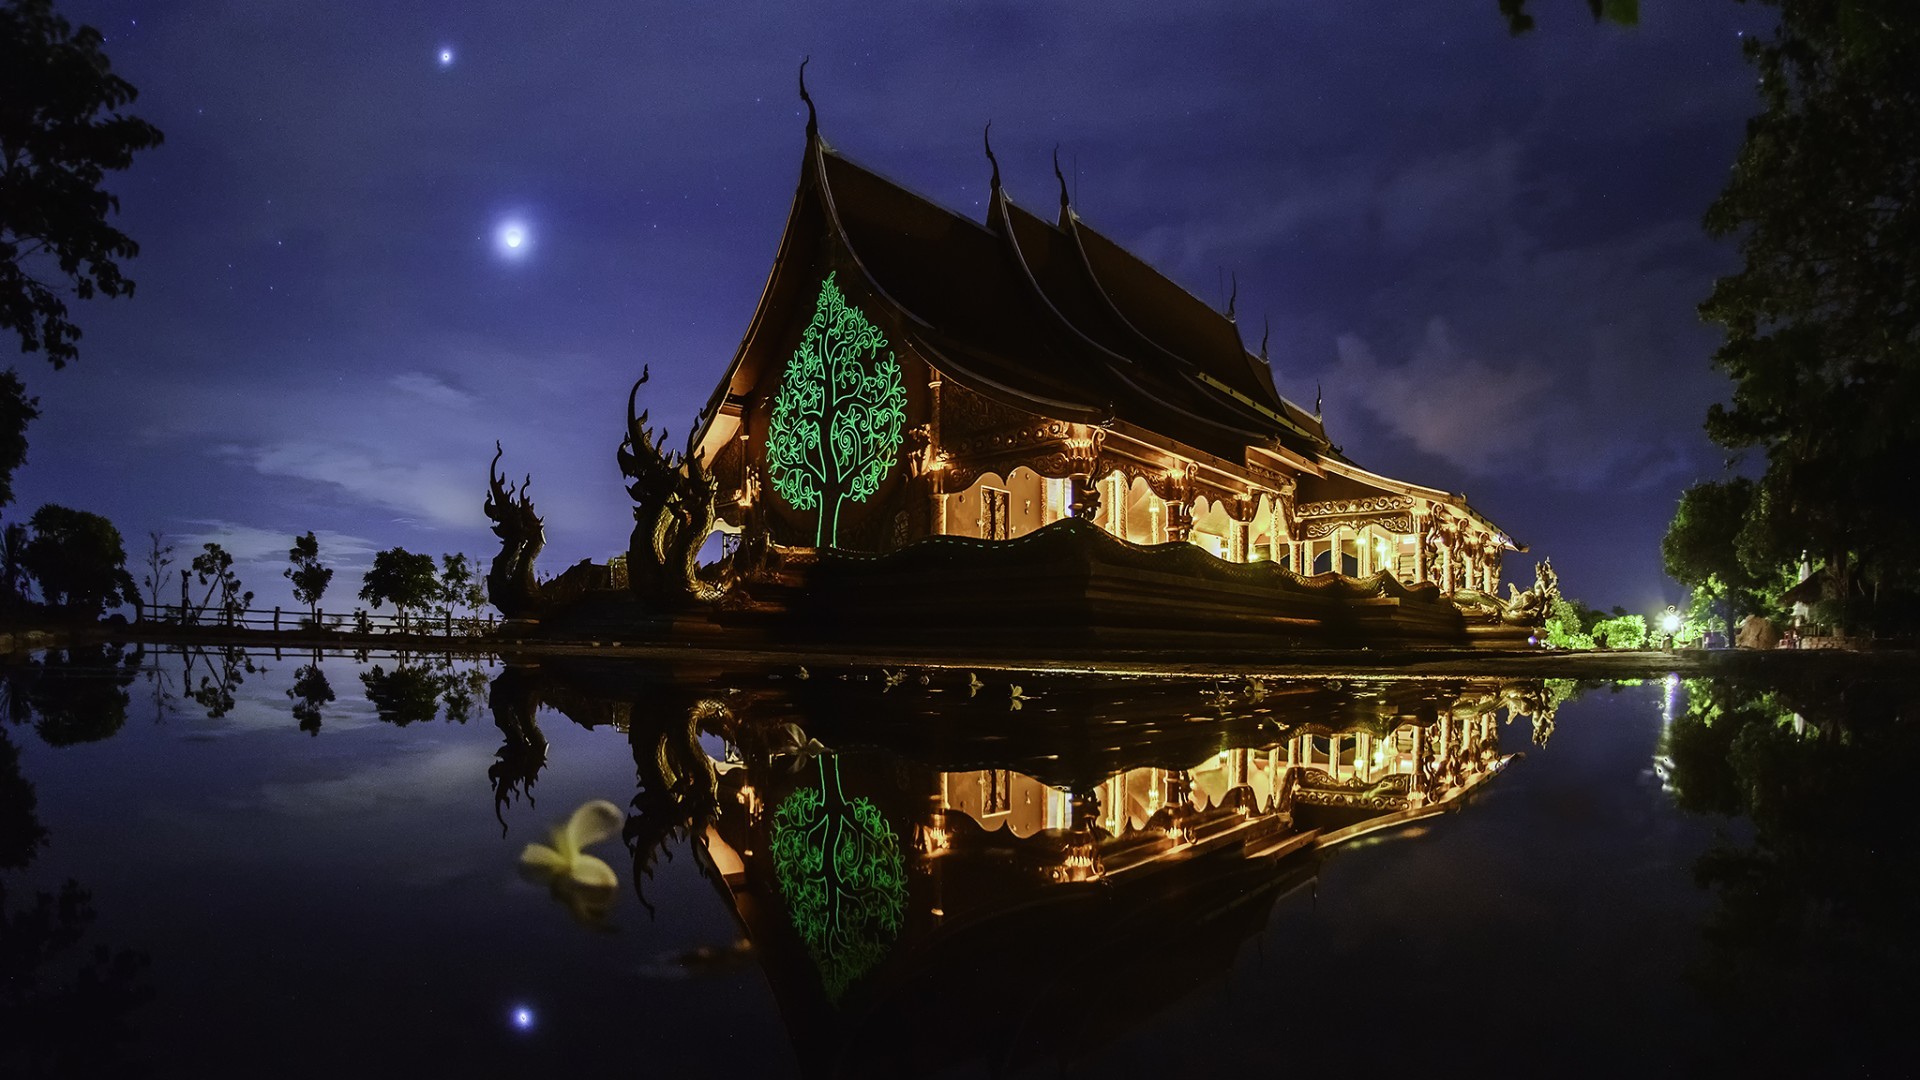 nature, Landscape, Architecture, Trees, Building, Water, Lake, Night, Asian architecture, Reflection, Dragon, Lights, Clouds, Neon Wallpaper